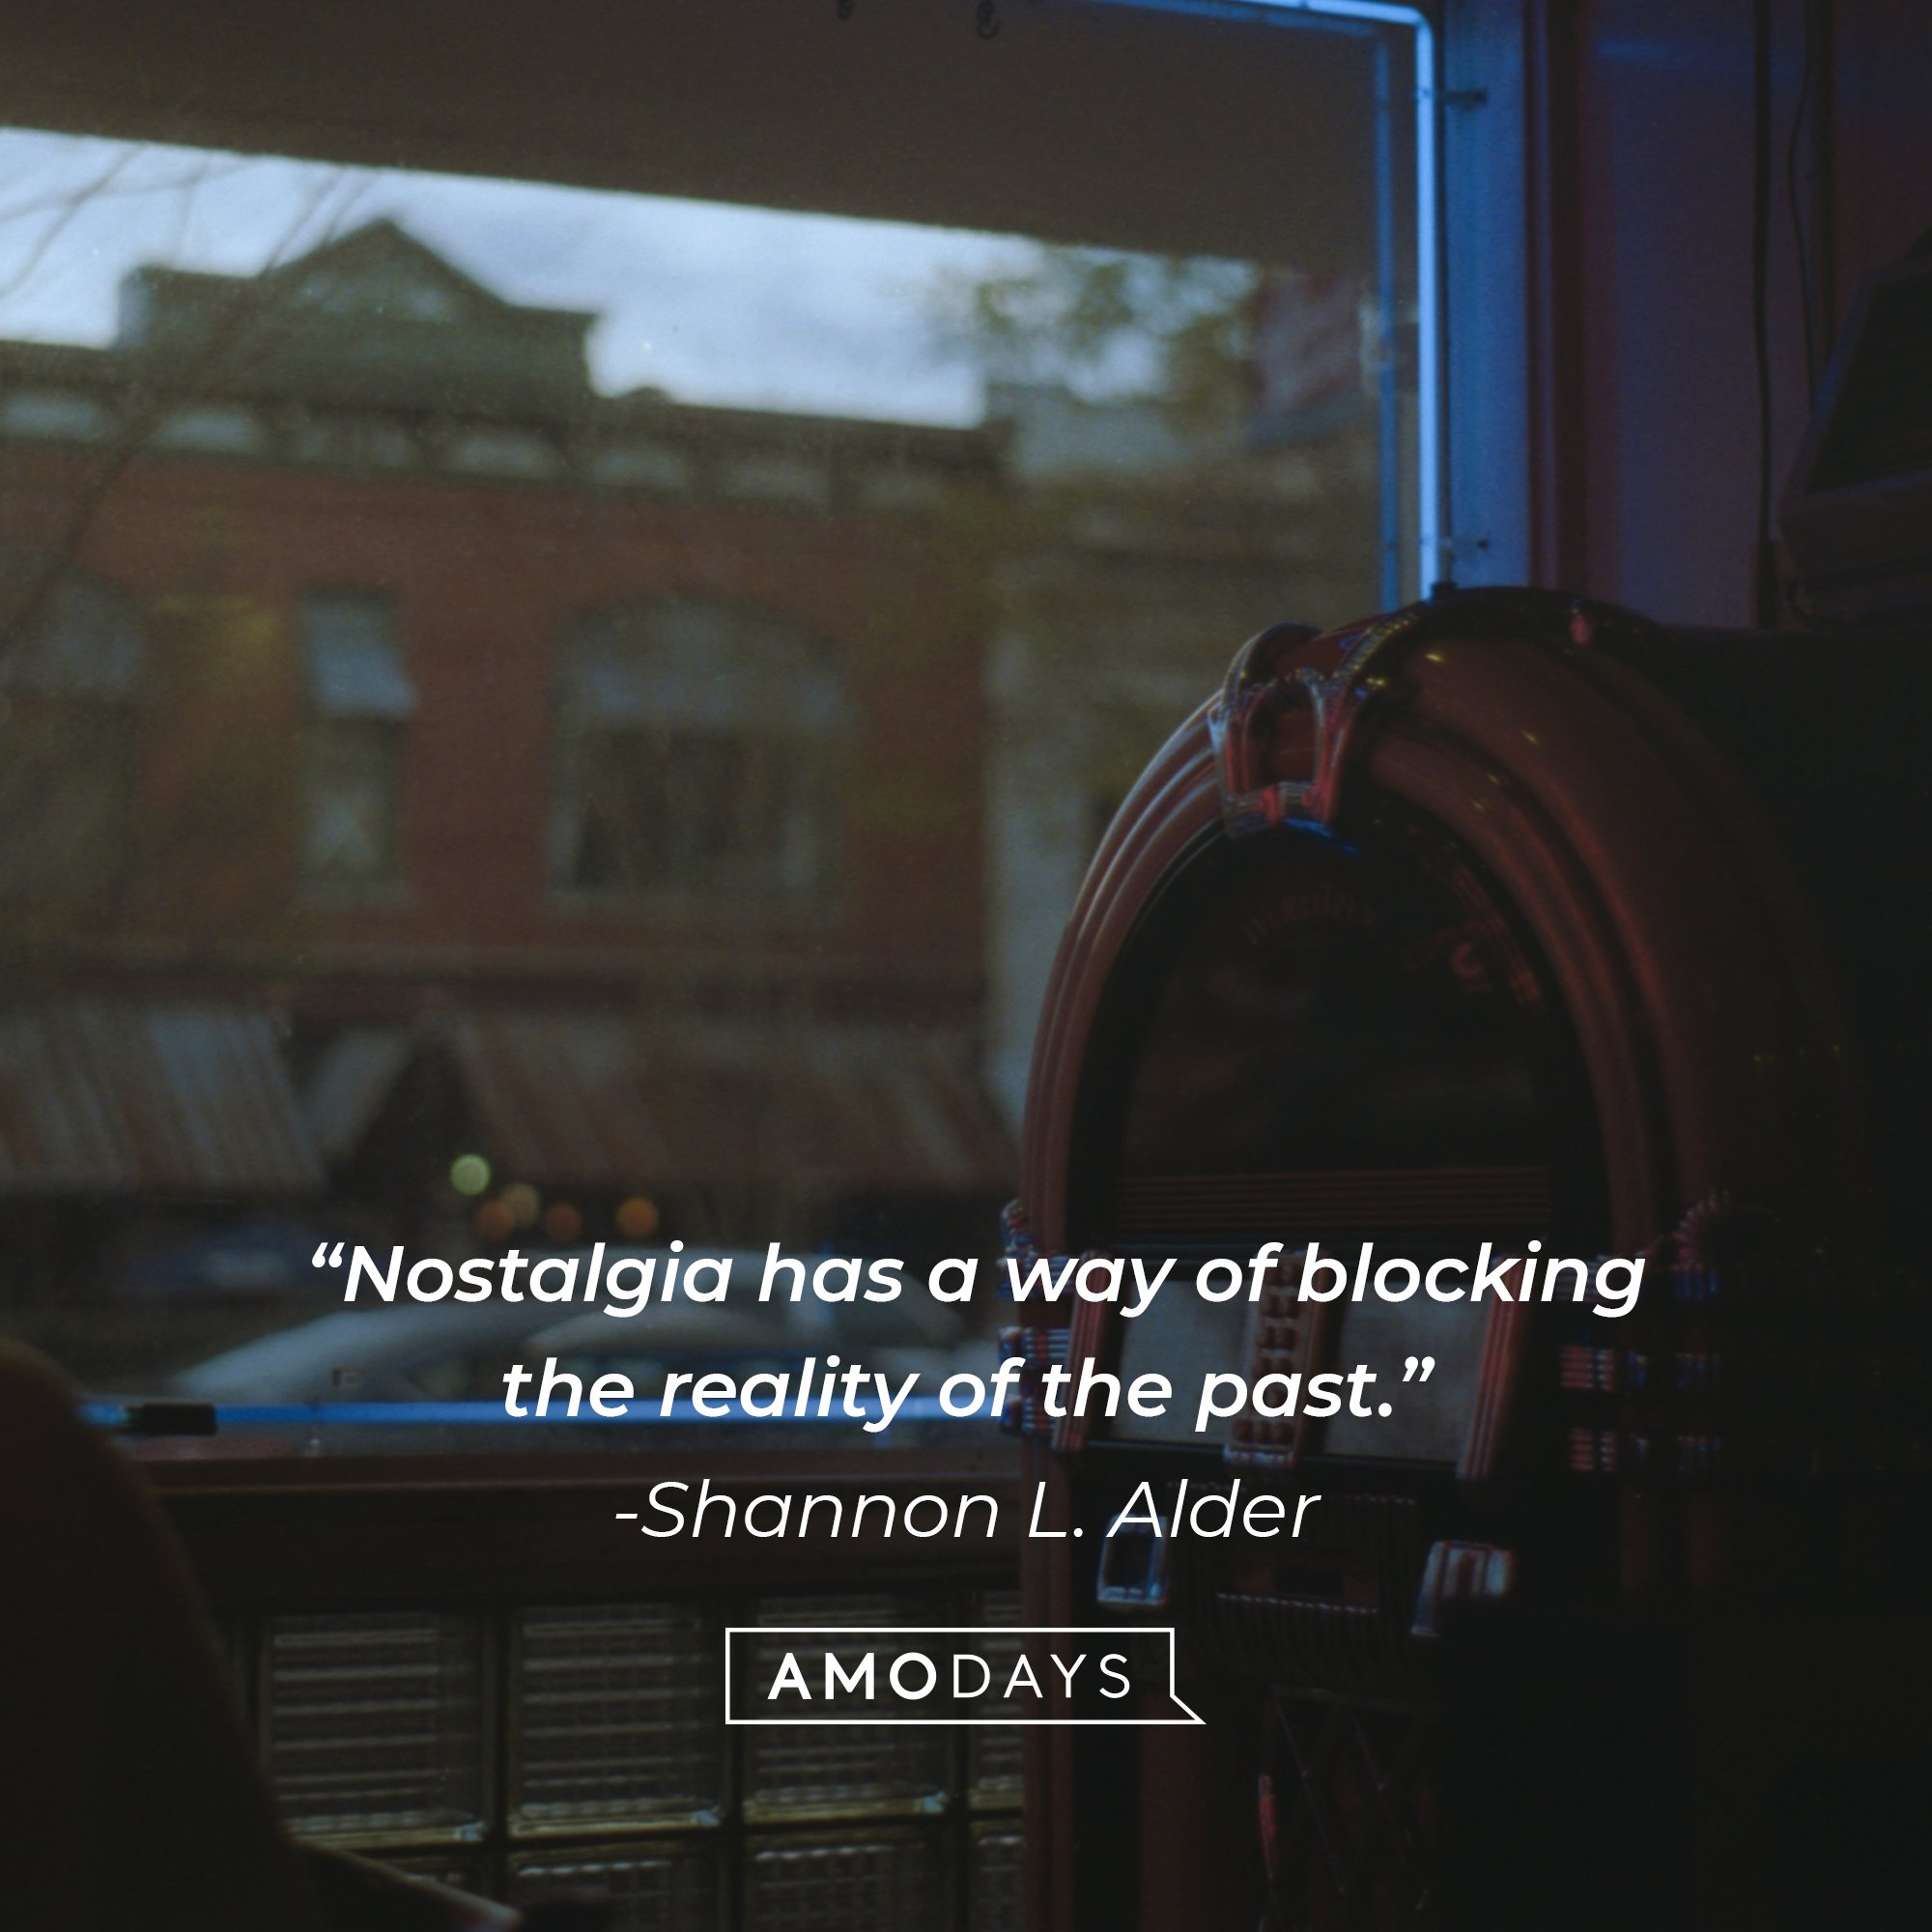  Shannon L. Adler's quot:  “Nostalgia has a way of blocking the reality of the past.” | Image: AmoDays